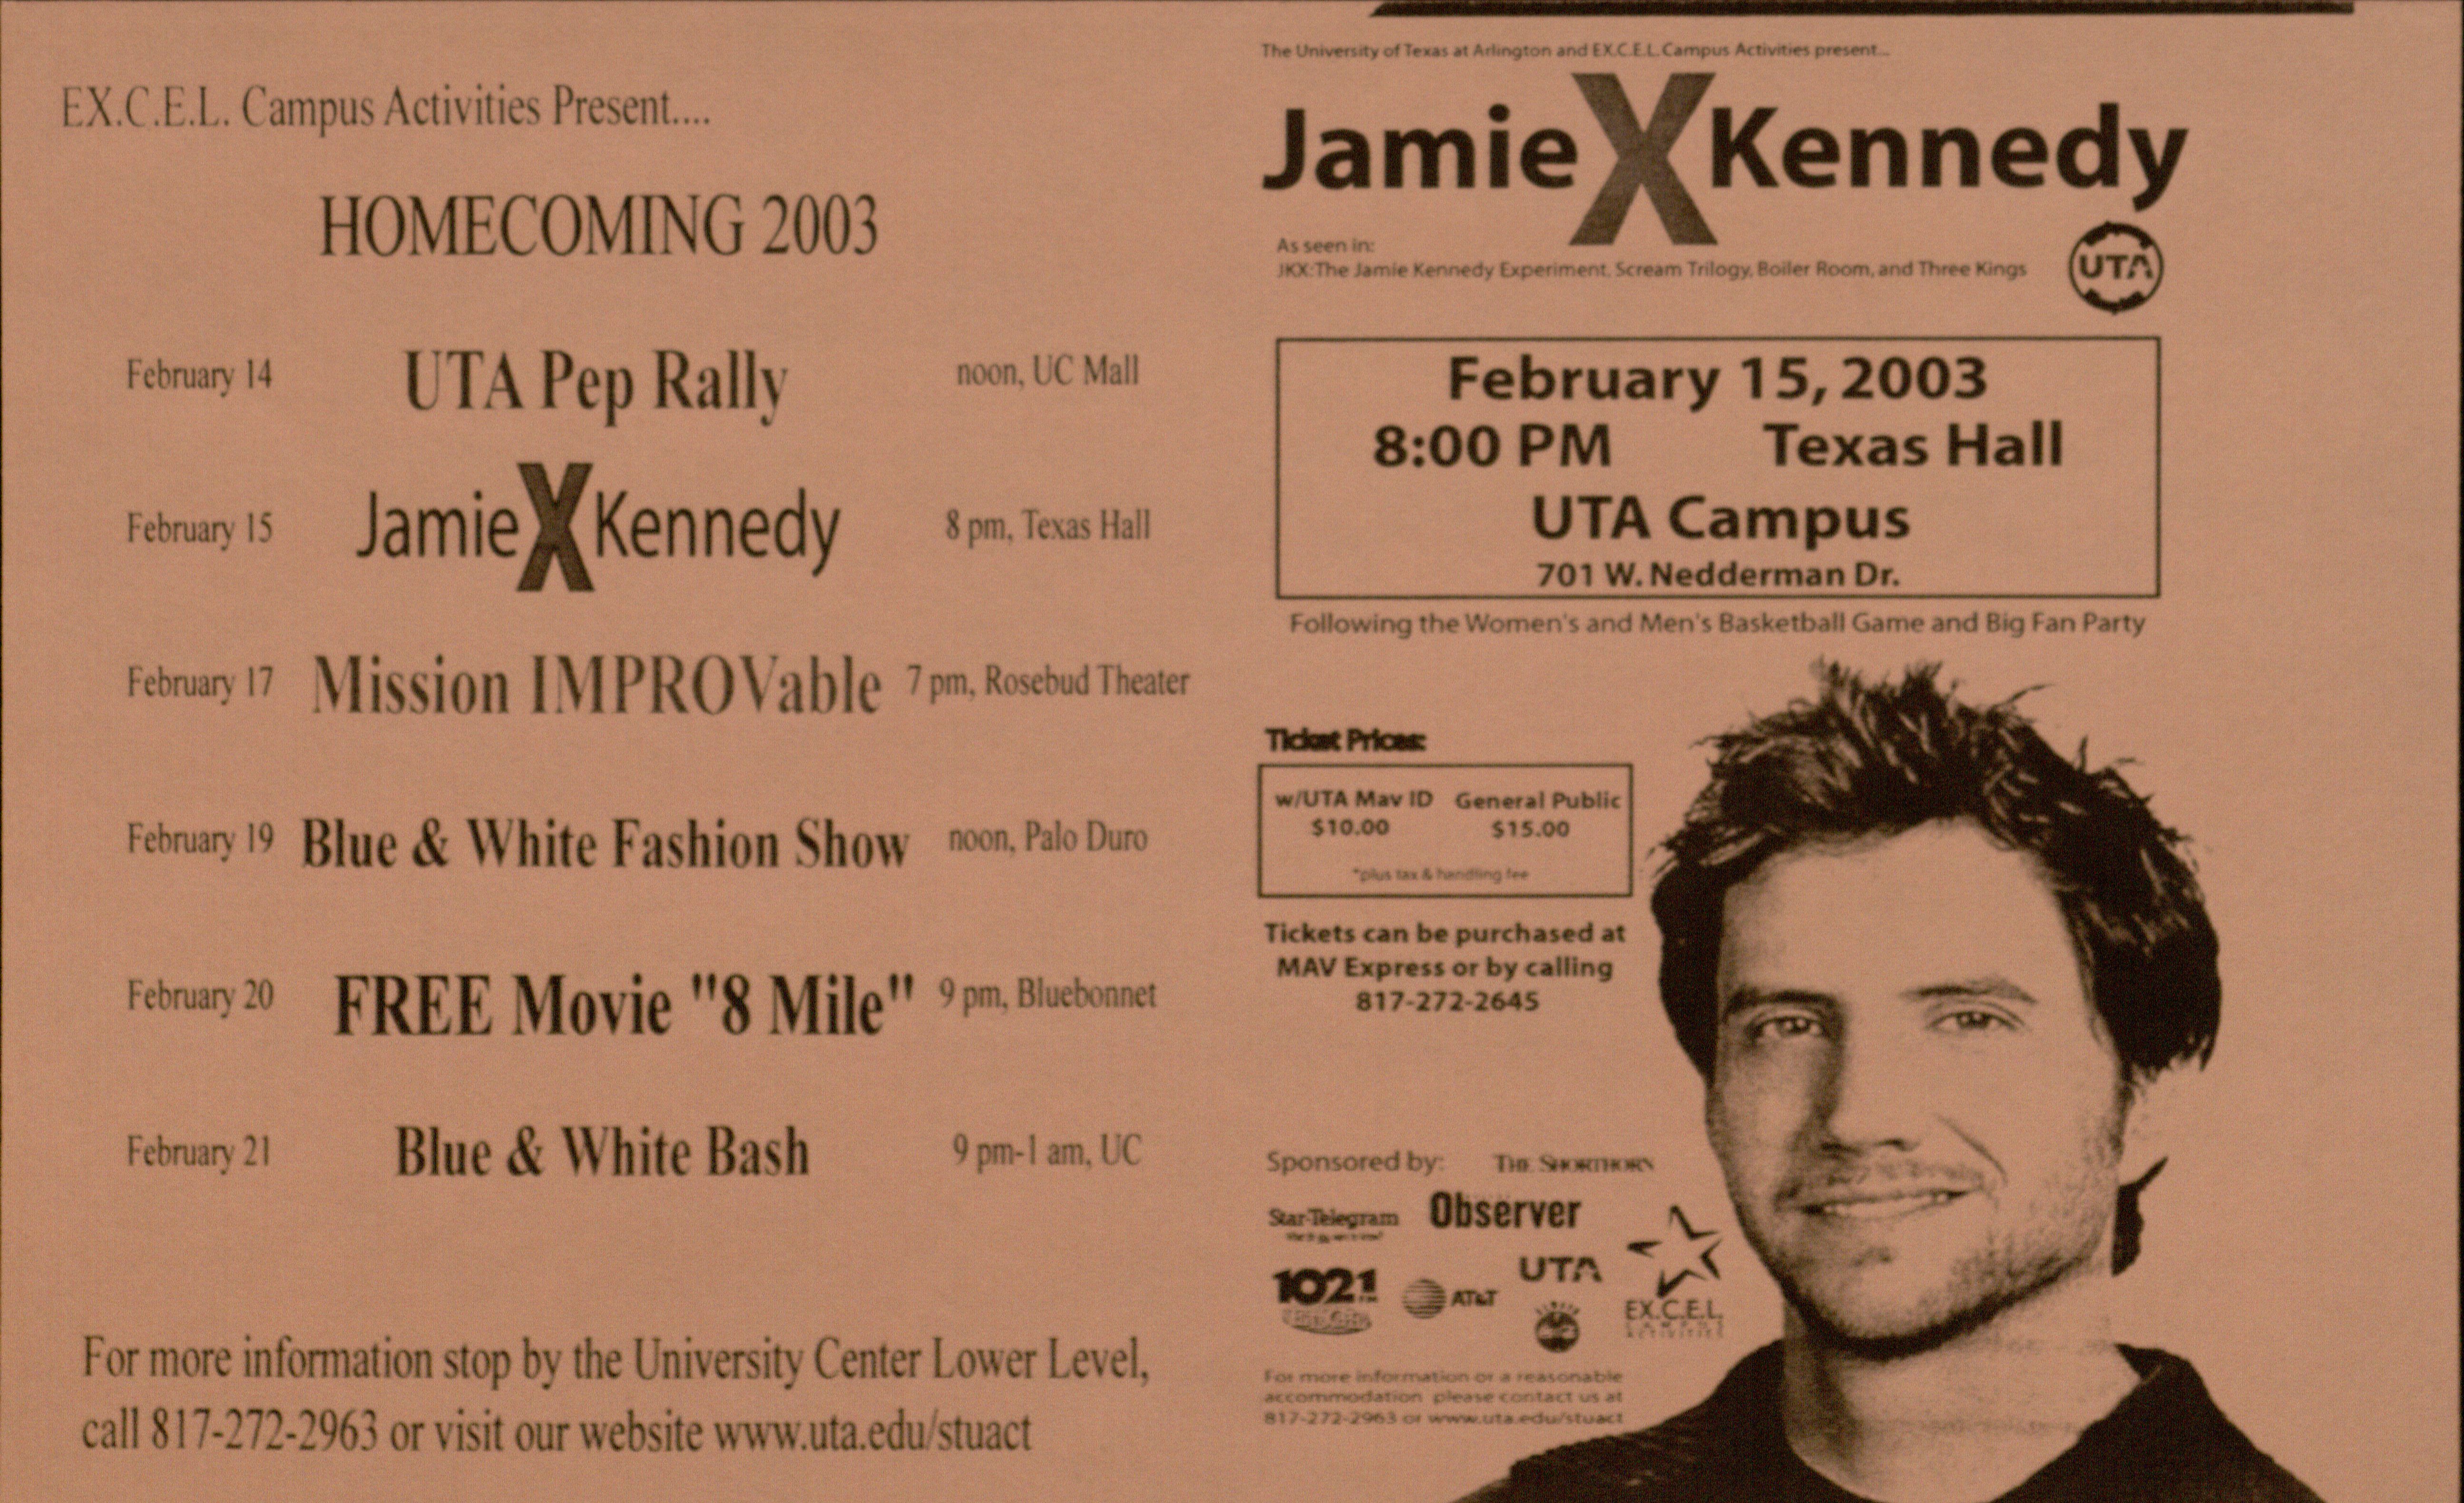 Homecoming flyer with text and a photo of Jamie Kennedy's face.